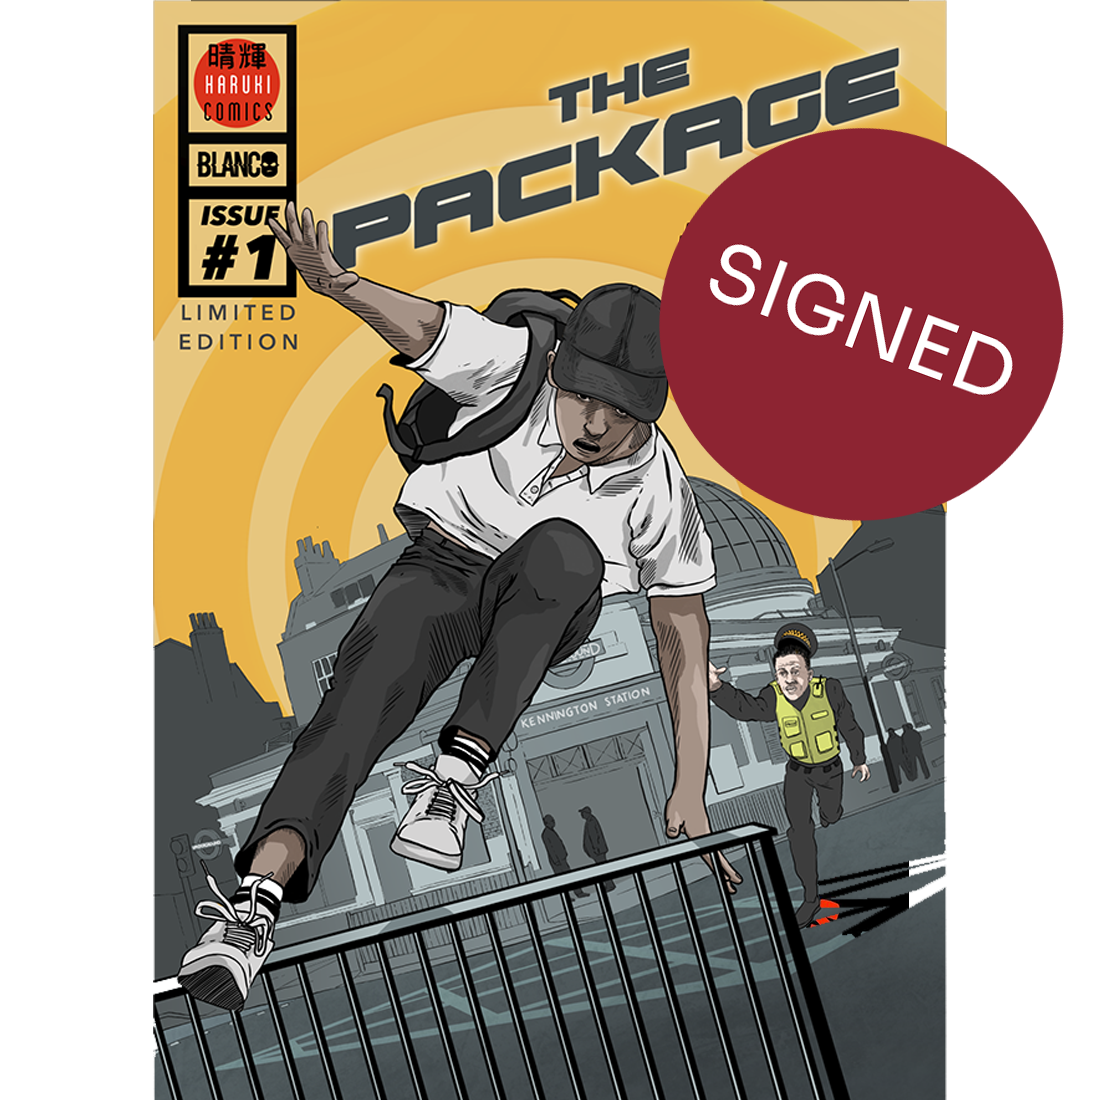 Blanco - The Package: Signed Comic Book